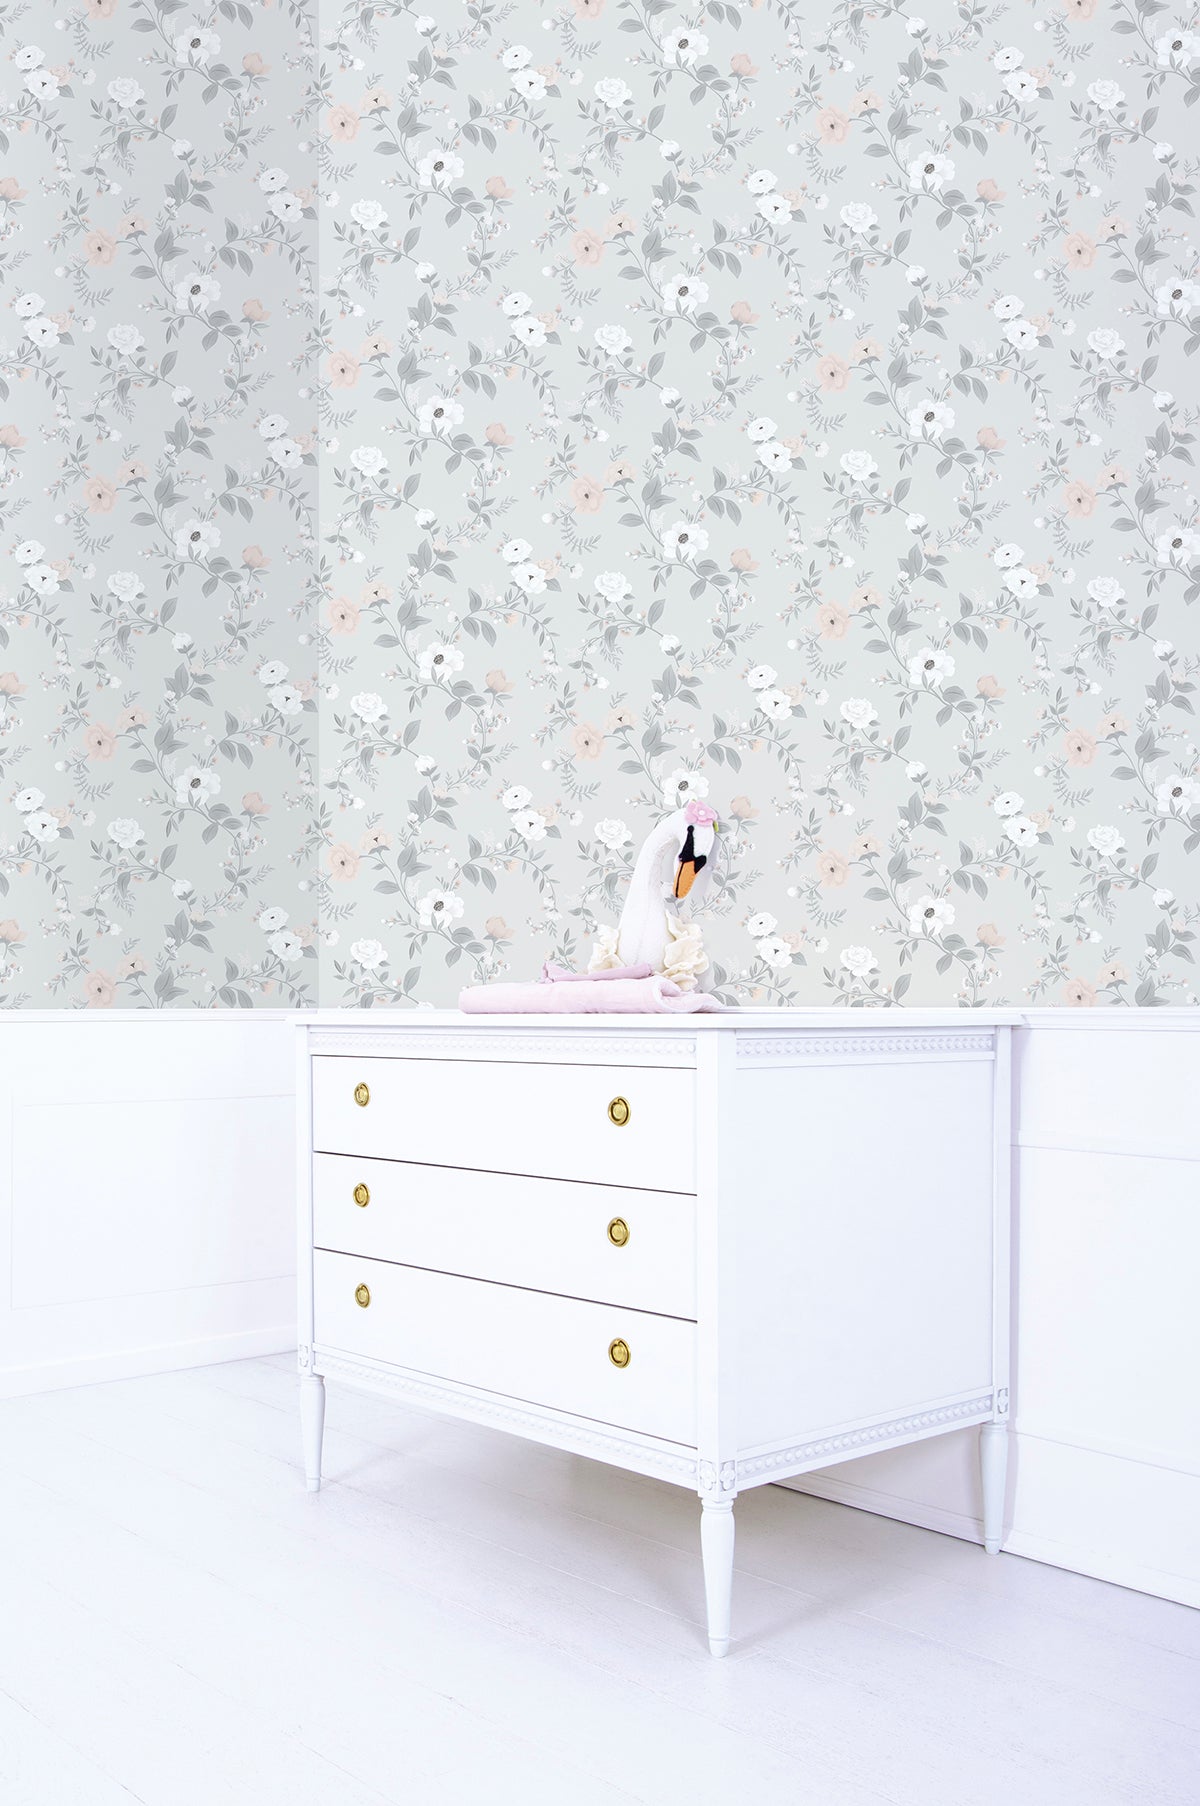 Lilipinso Wallpaper (50 Cm X 10 M) - Symphony Of Roses (Grey)